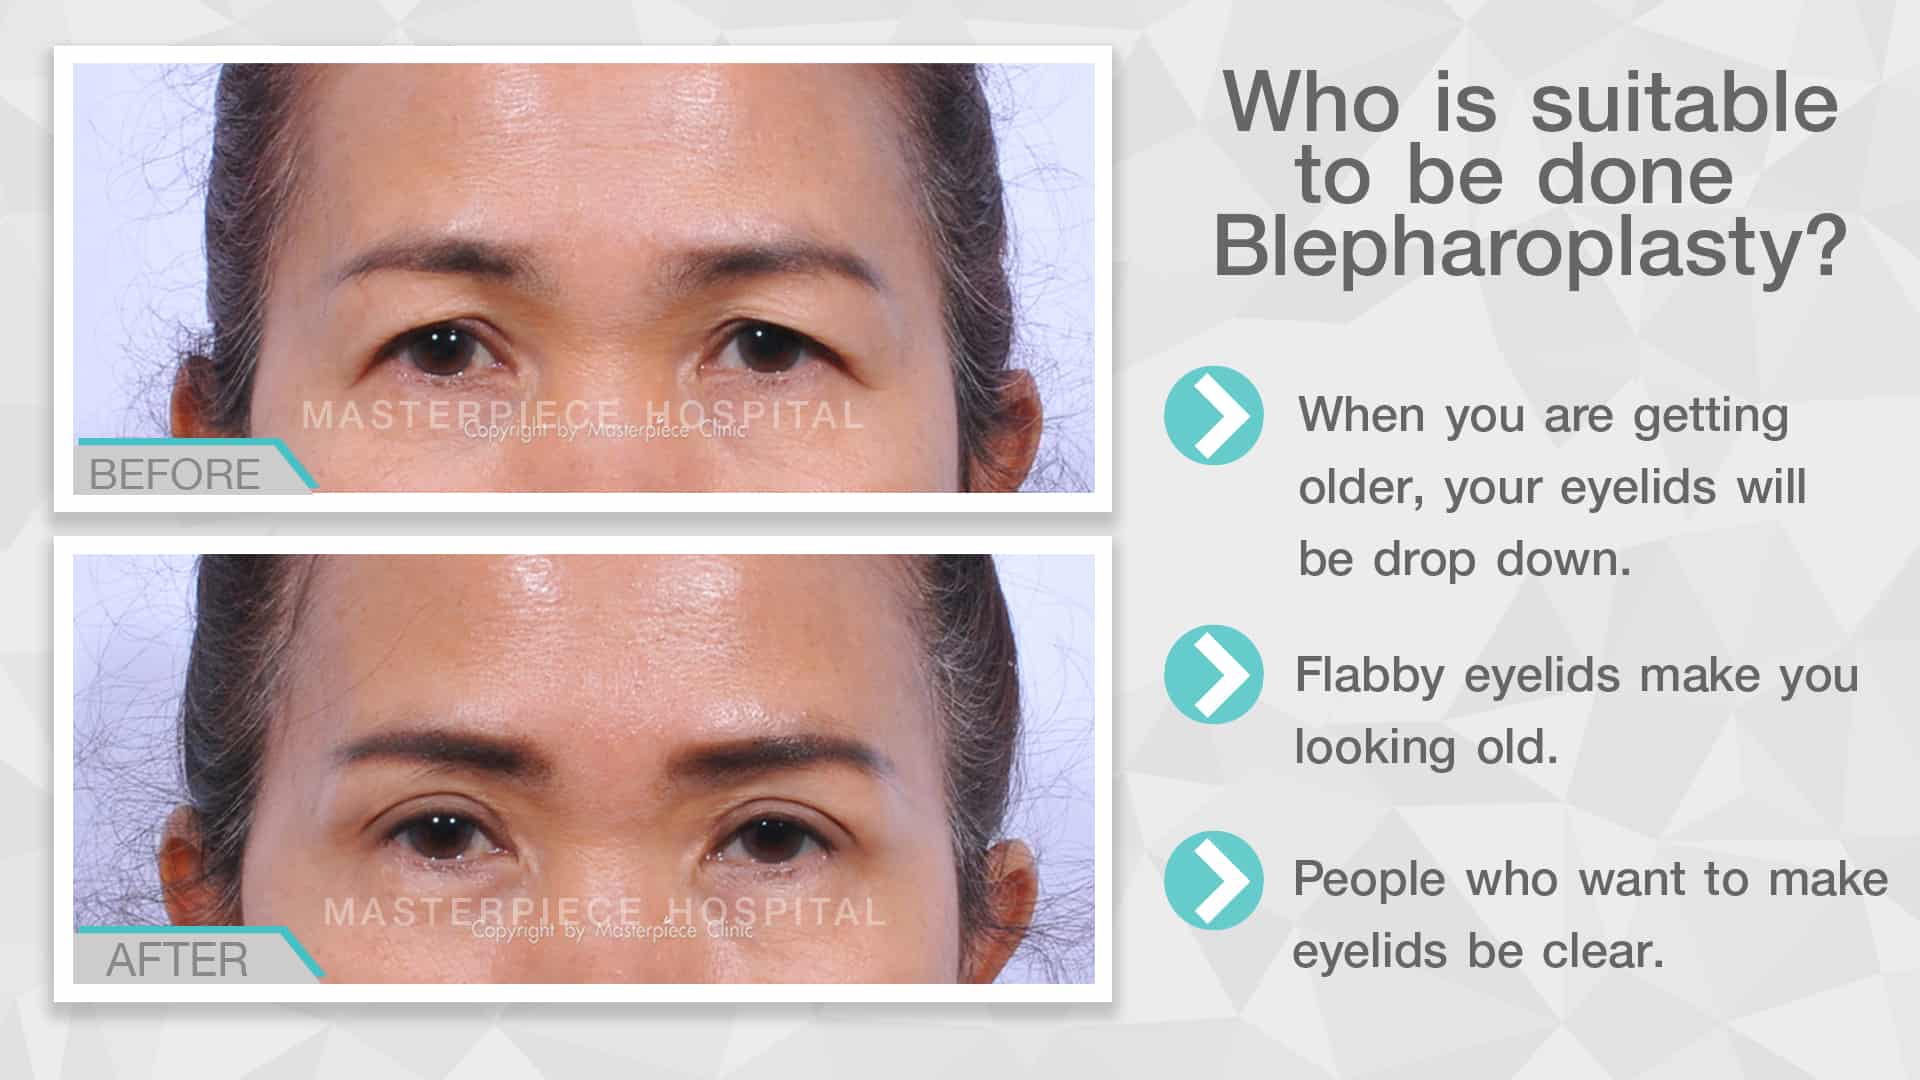 Who is suitable to be done Blepharoplasty?